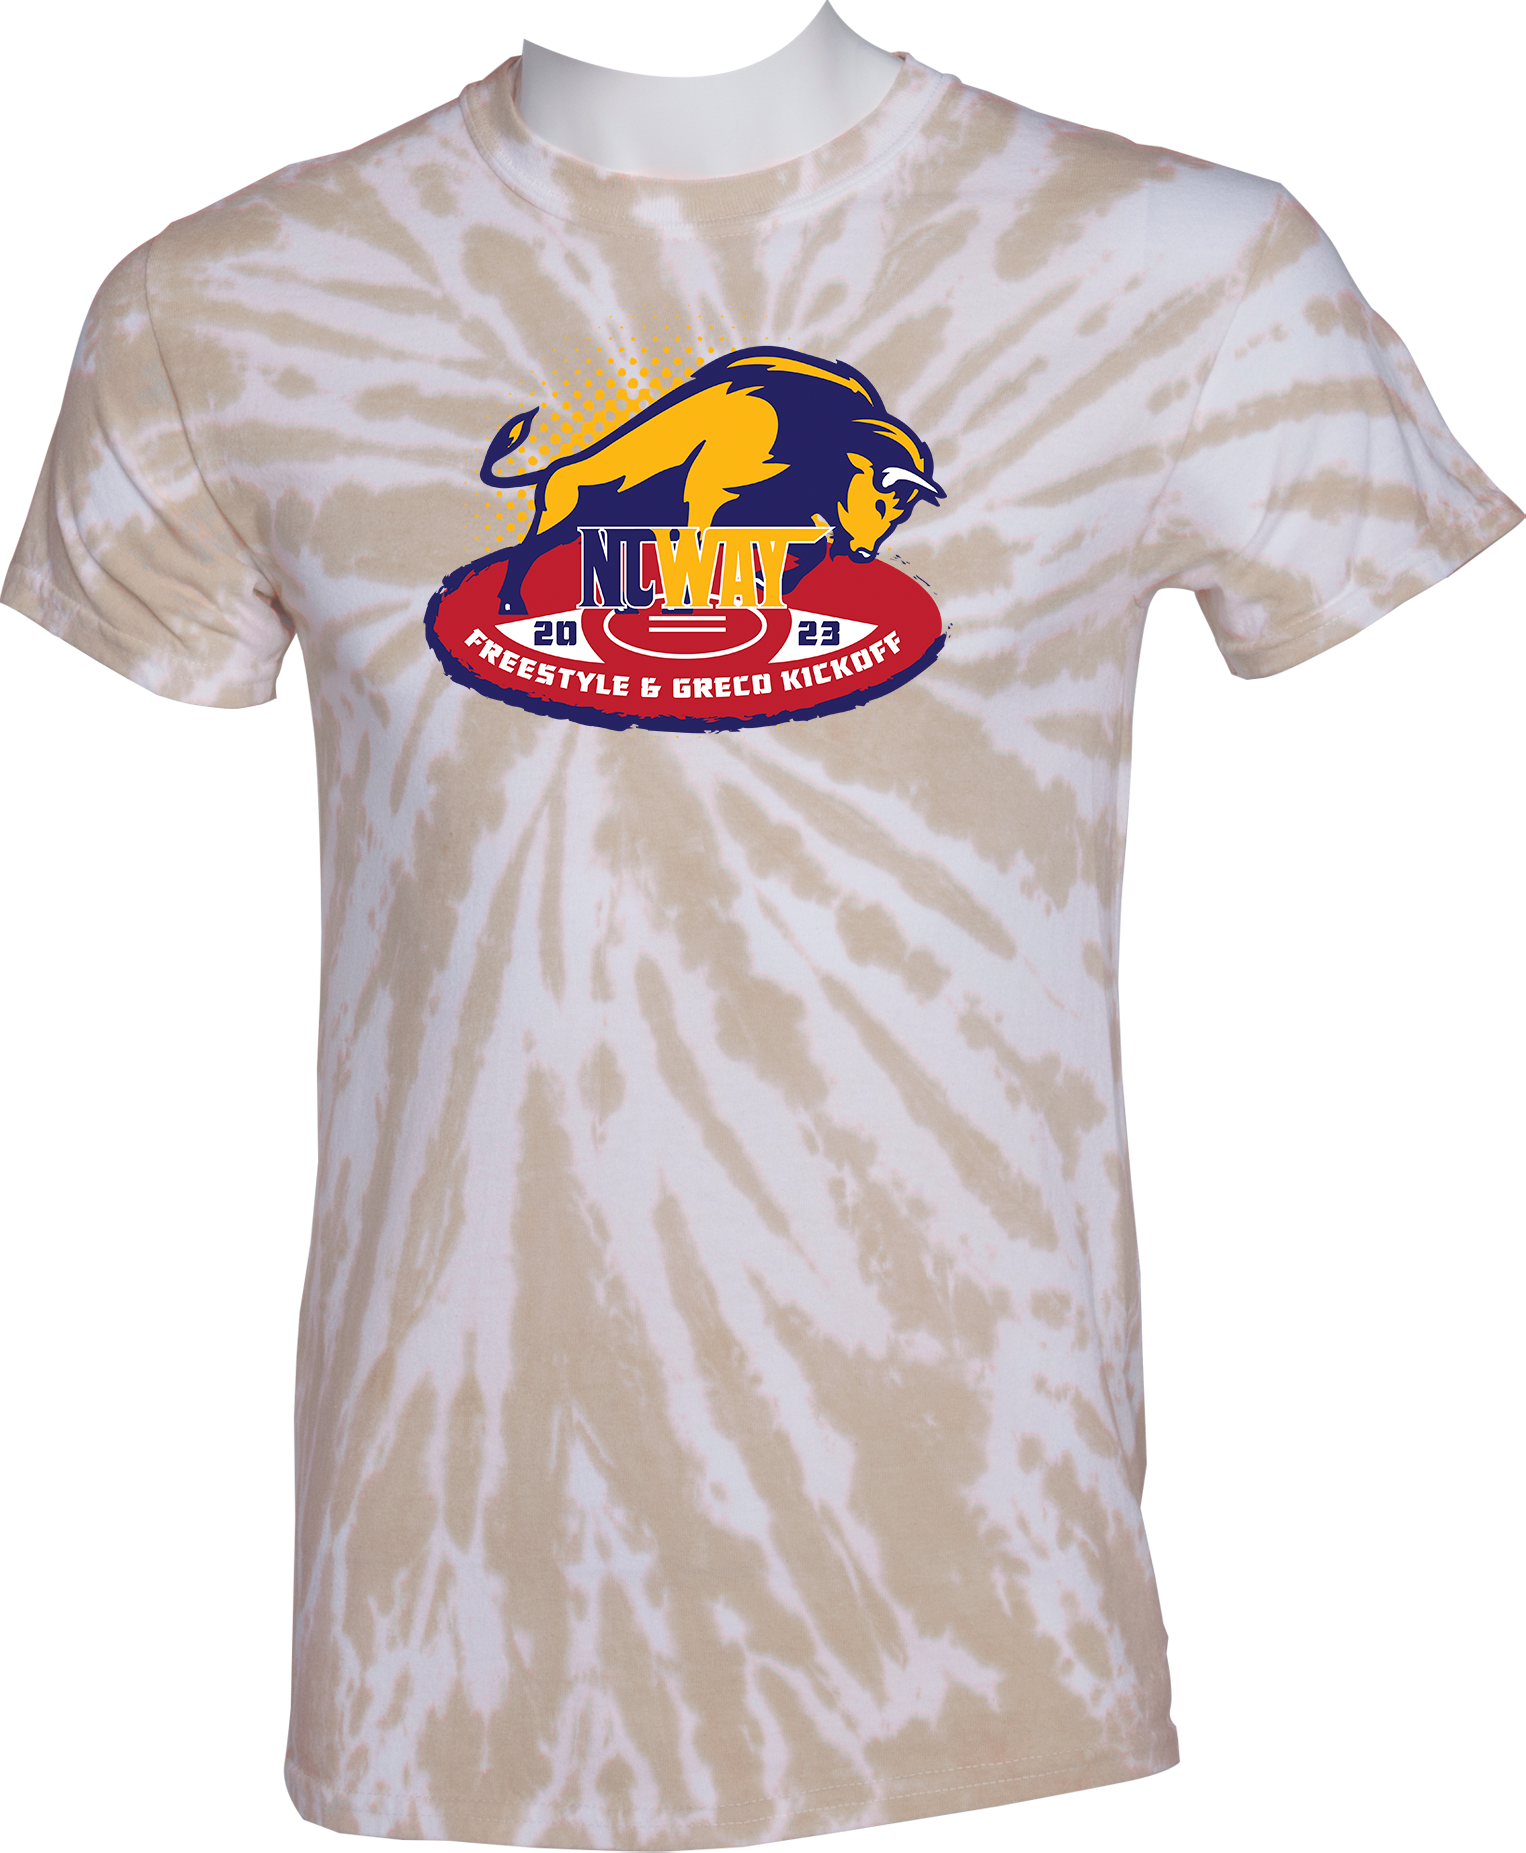 TIE-DYE SHORT SLEEVES - 2023 NCWAY Freestyle & Greco Kickoff